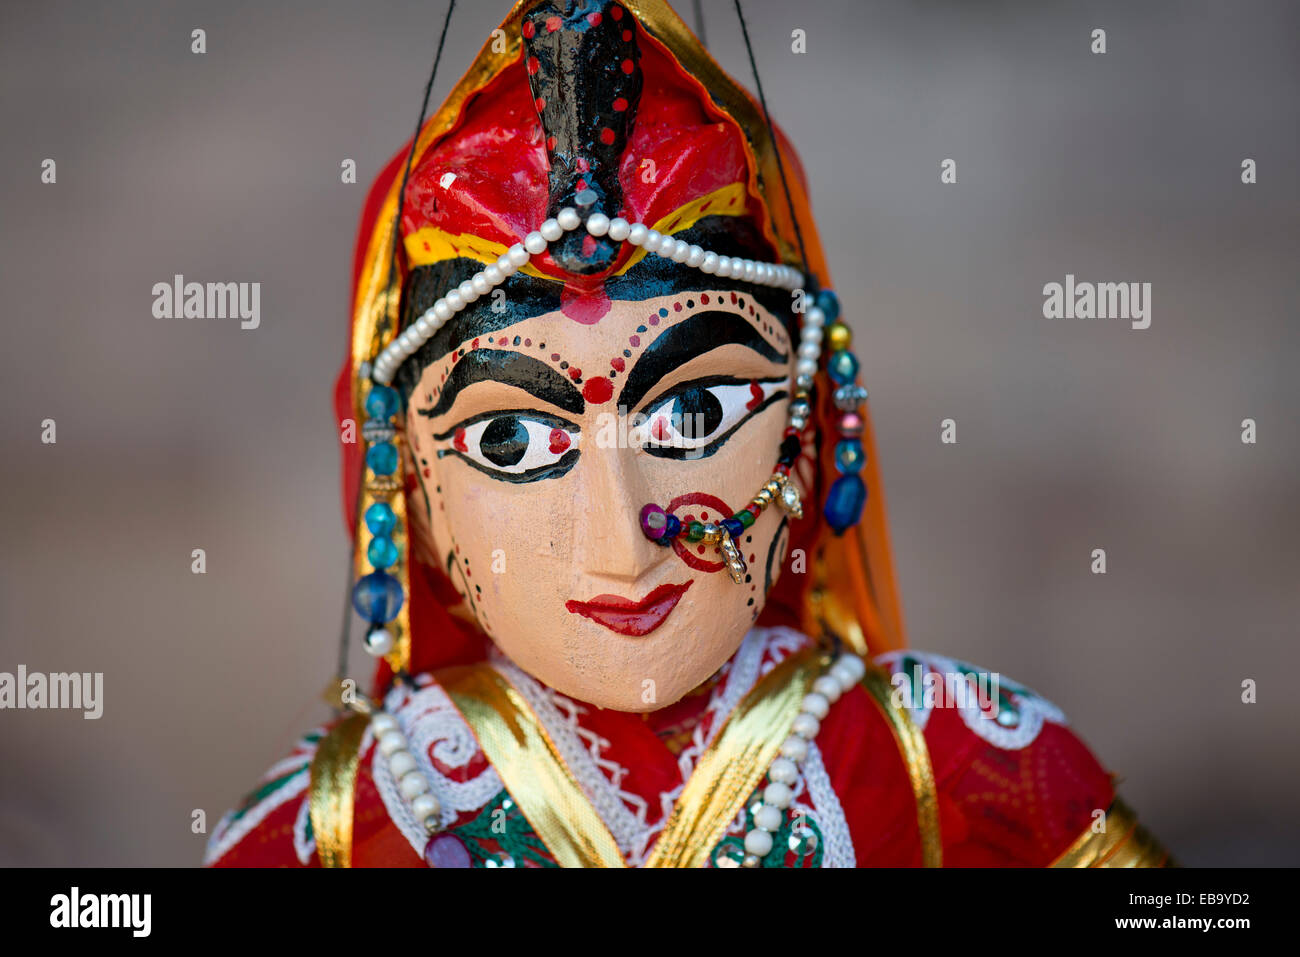 Marionette, traditional crafts, Jodhpur, Rajasthan, India Stock Photo